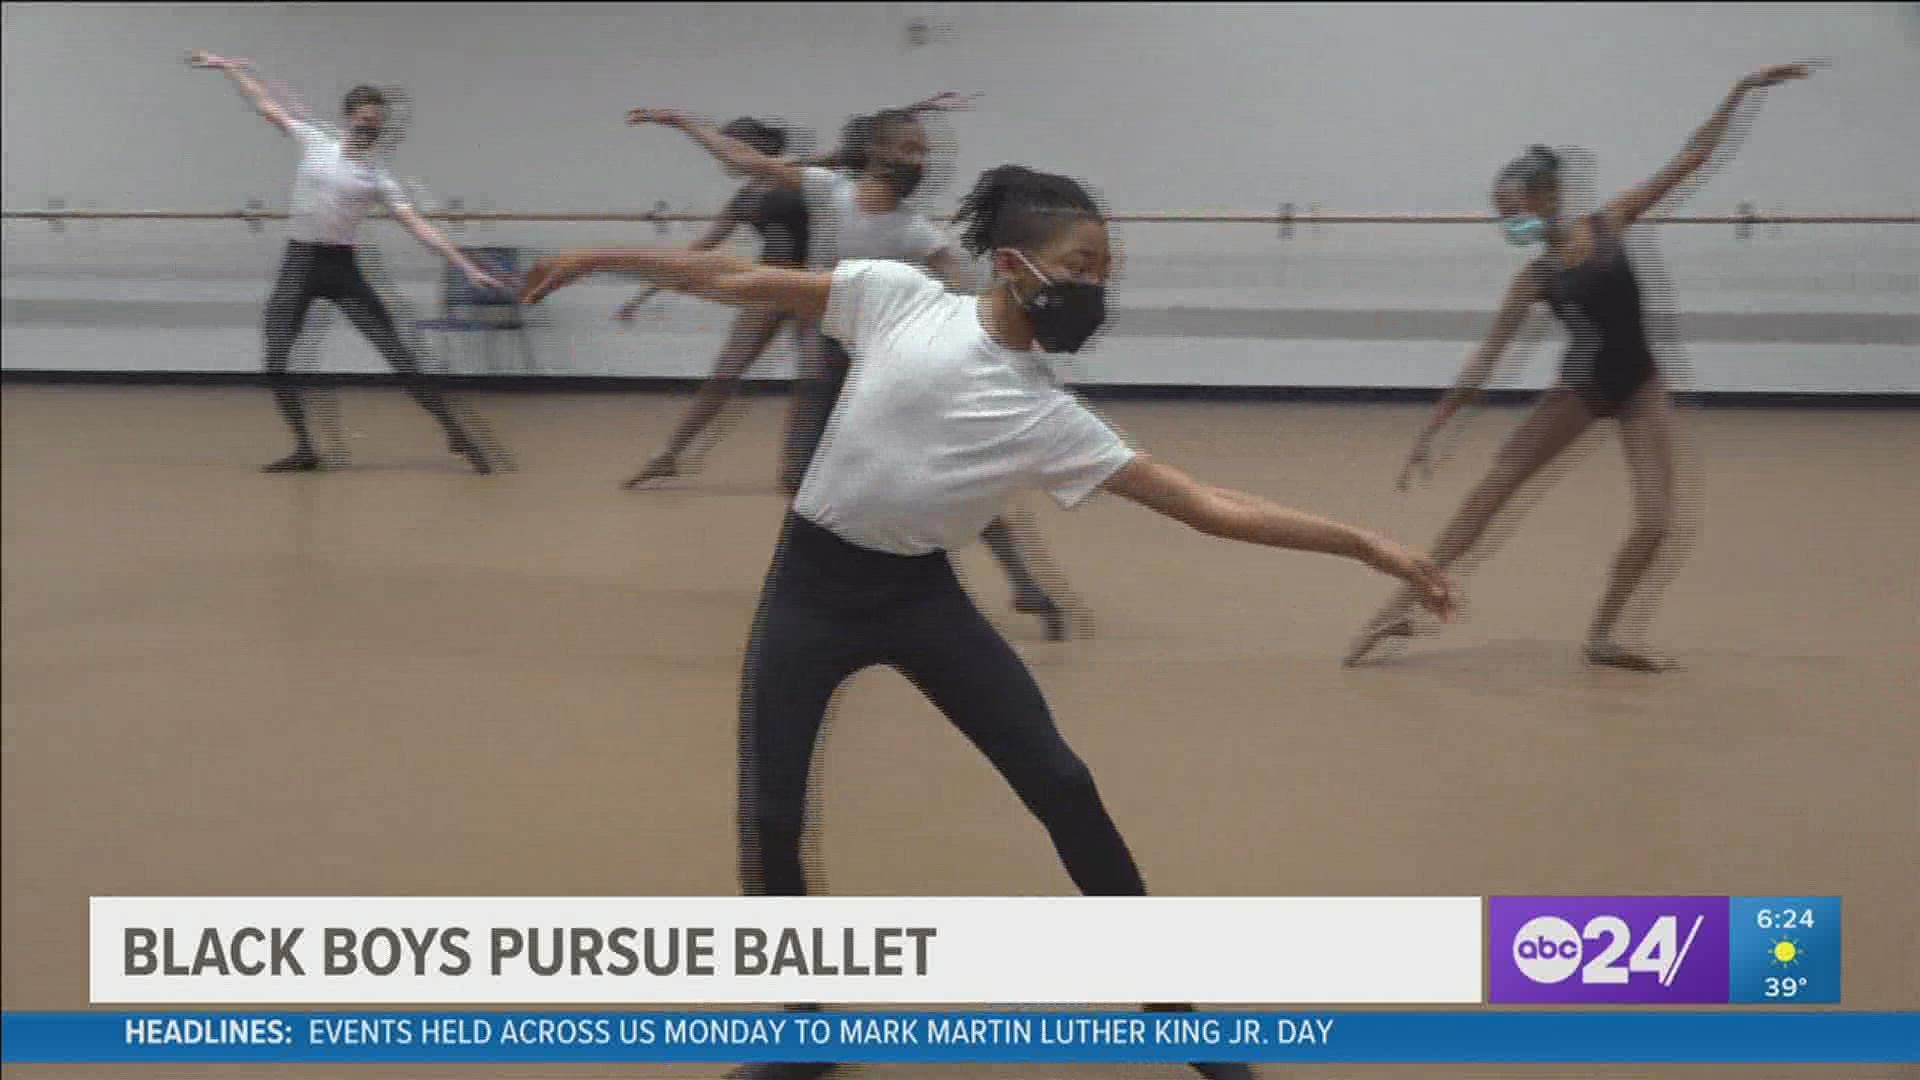 The studio aims to create diversity in dance.